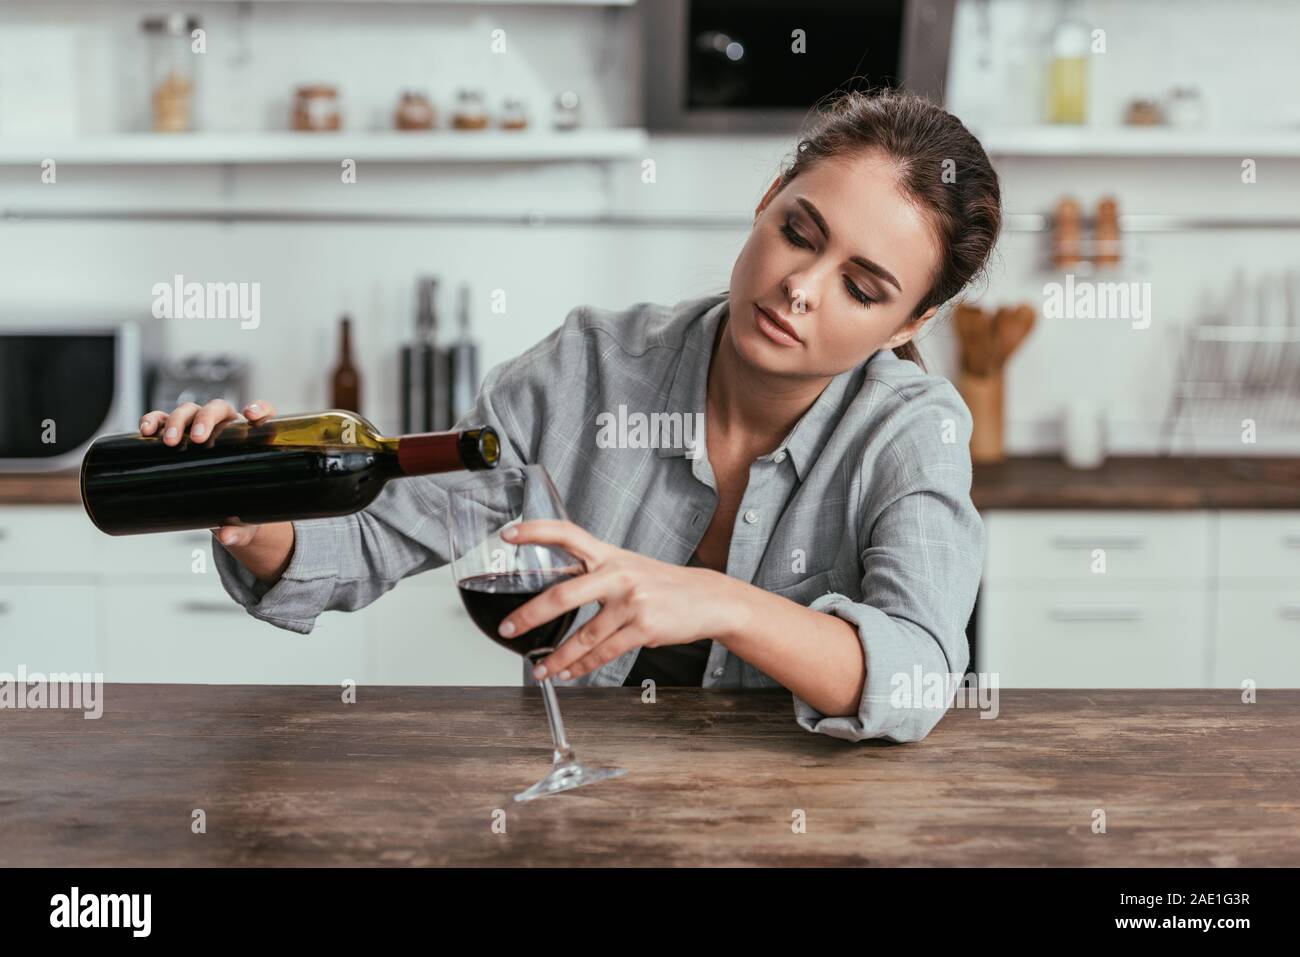 Upset woman pouring wine in glass at kitchen table Stock Photo